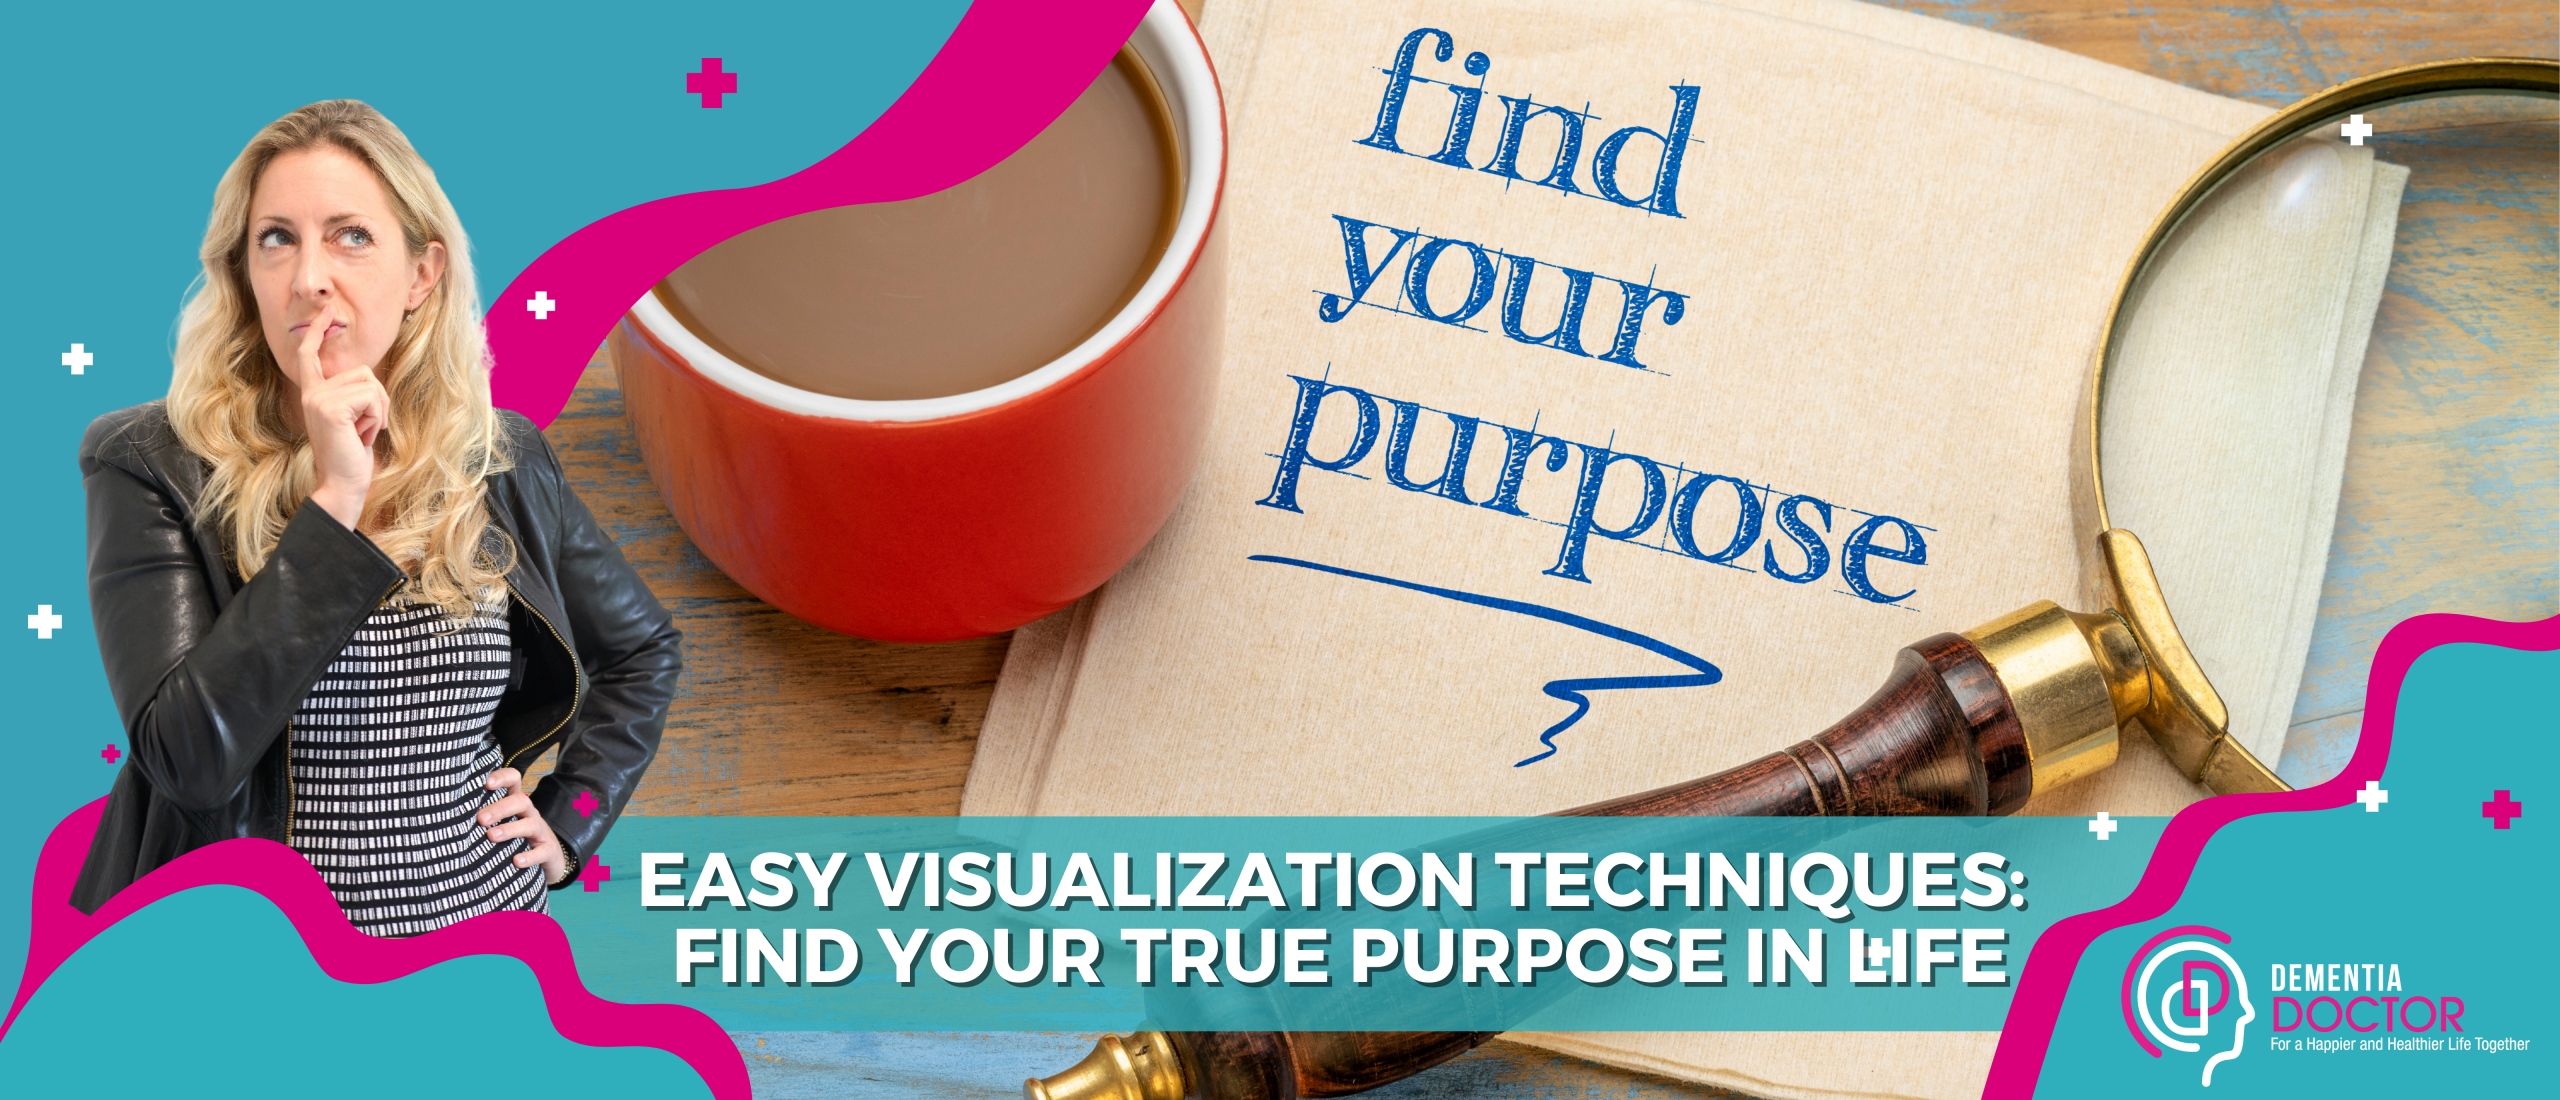 Easy Visualization Techniques to Help You Find Your True Purpose in Life